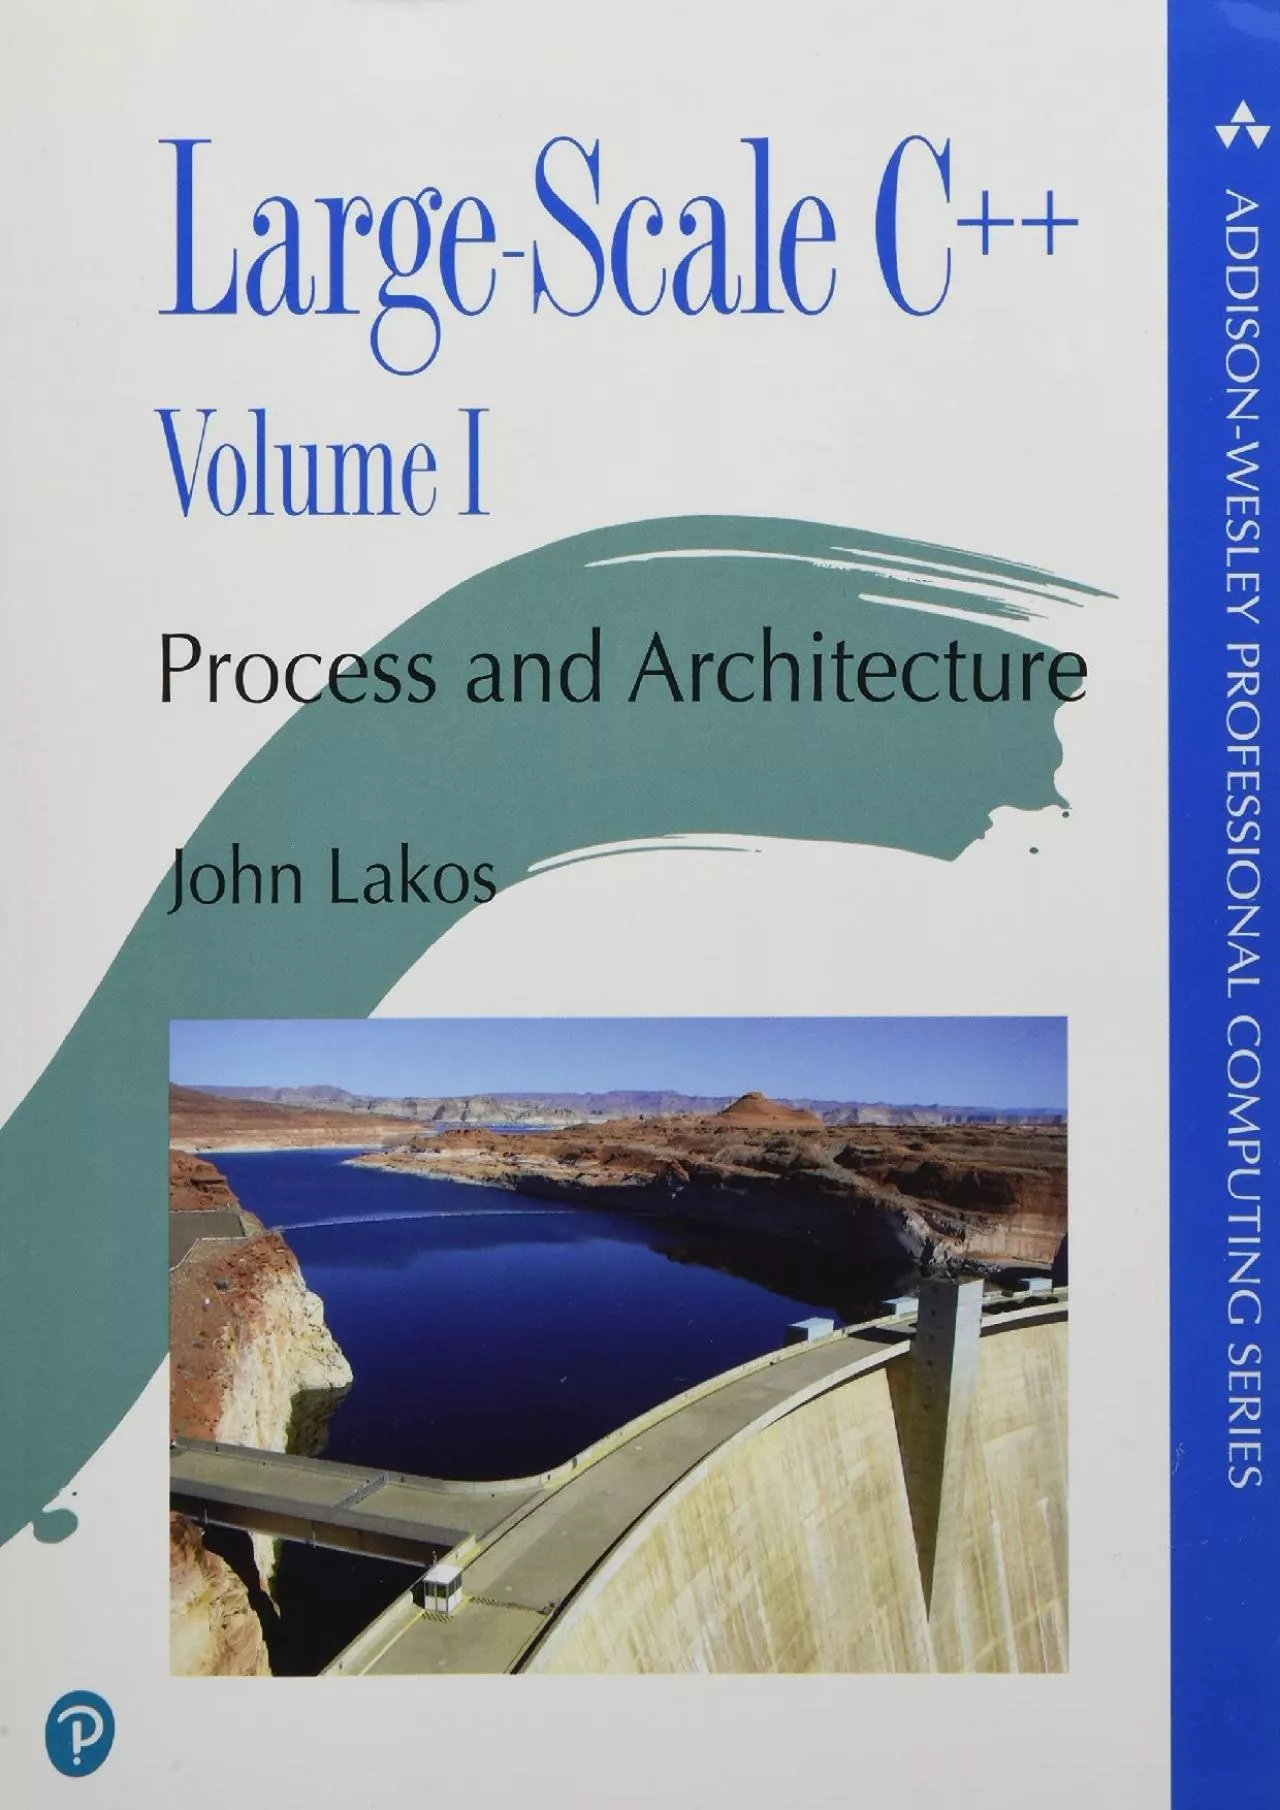 [eBOOK]-Large-Scale C++: Process and Architecture, Volume 1 (Addison-Wesley Professional